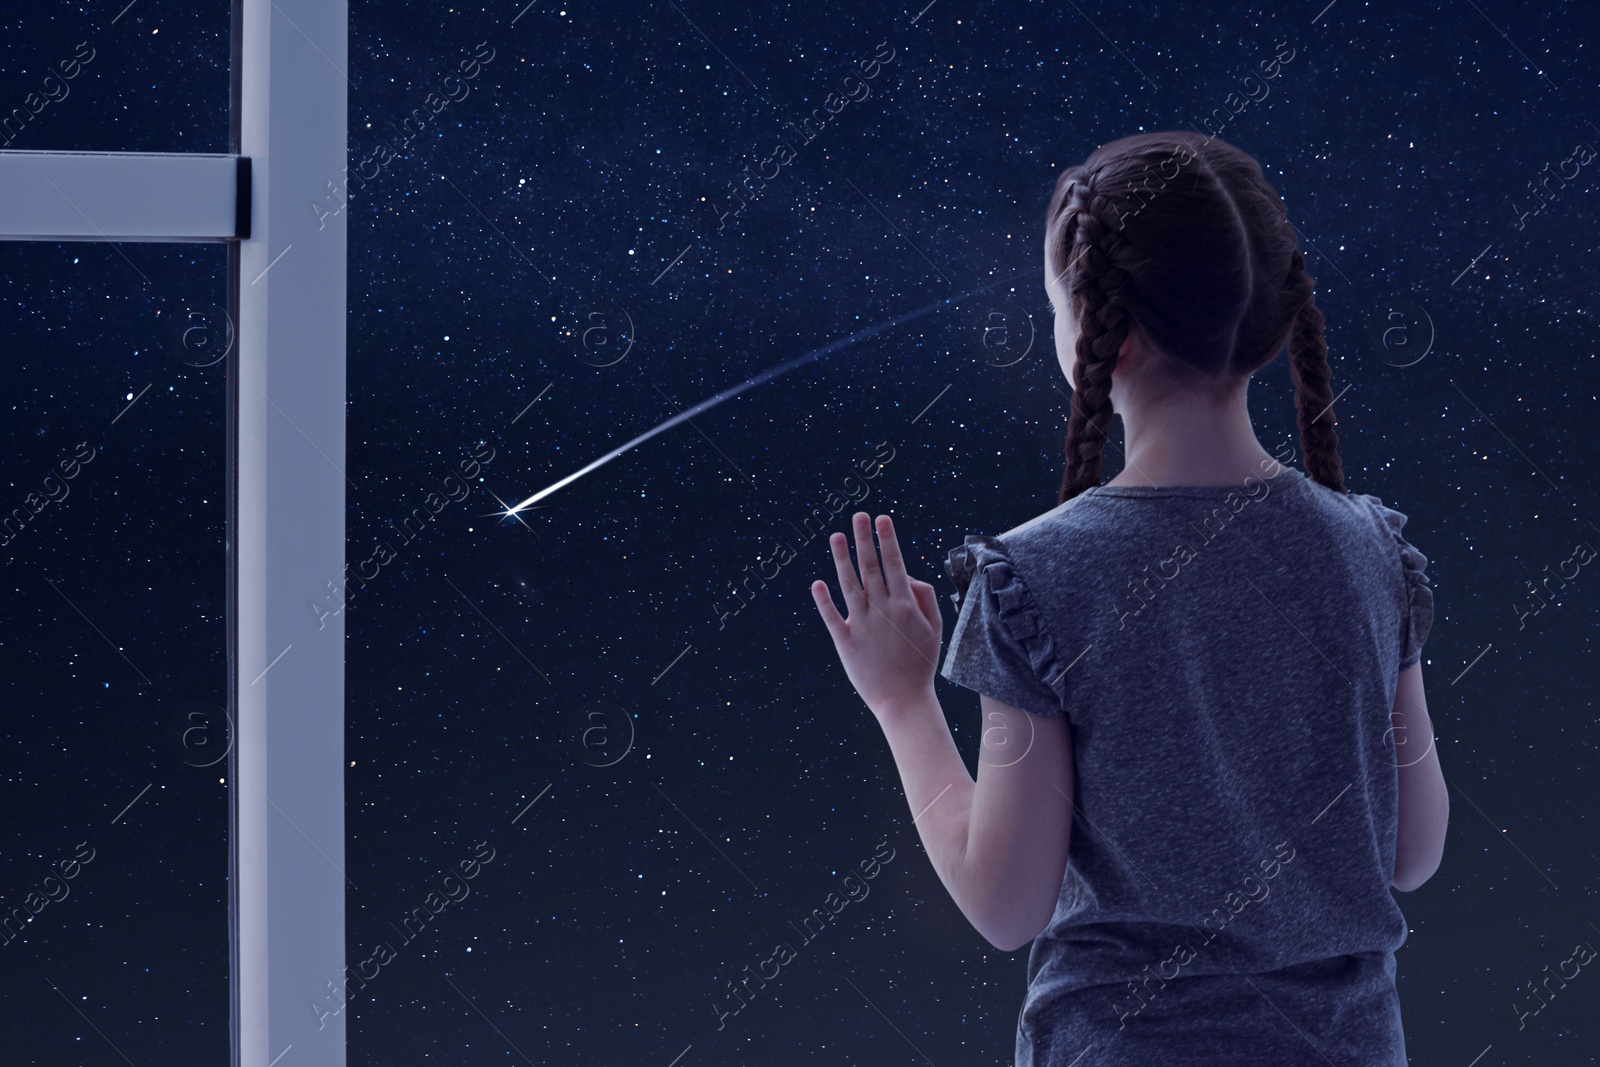 Image of Little girl near window looking at shooting star in beautiful night sky